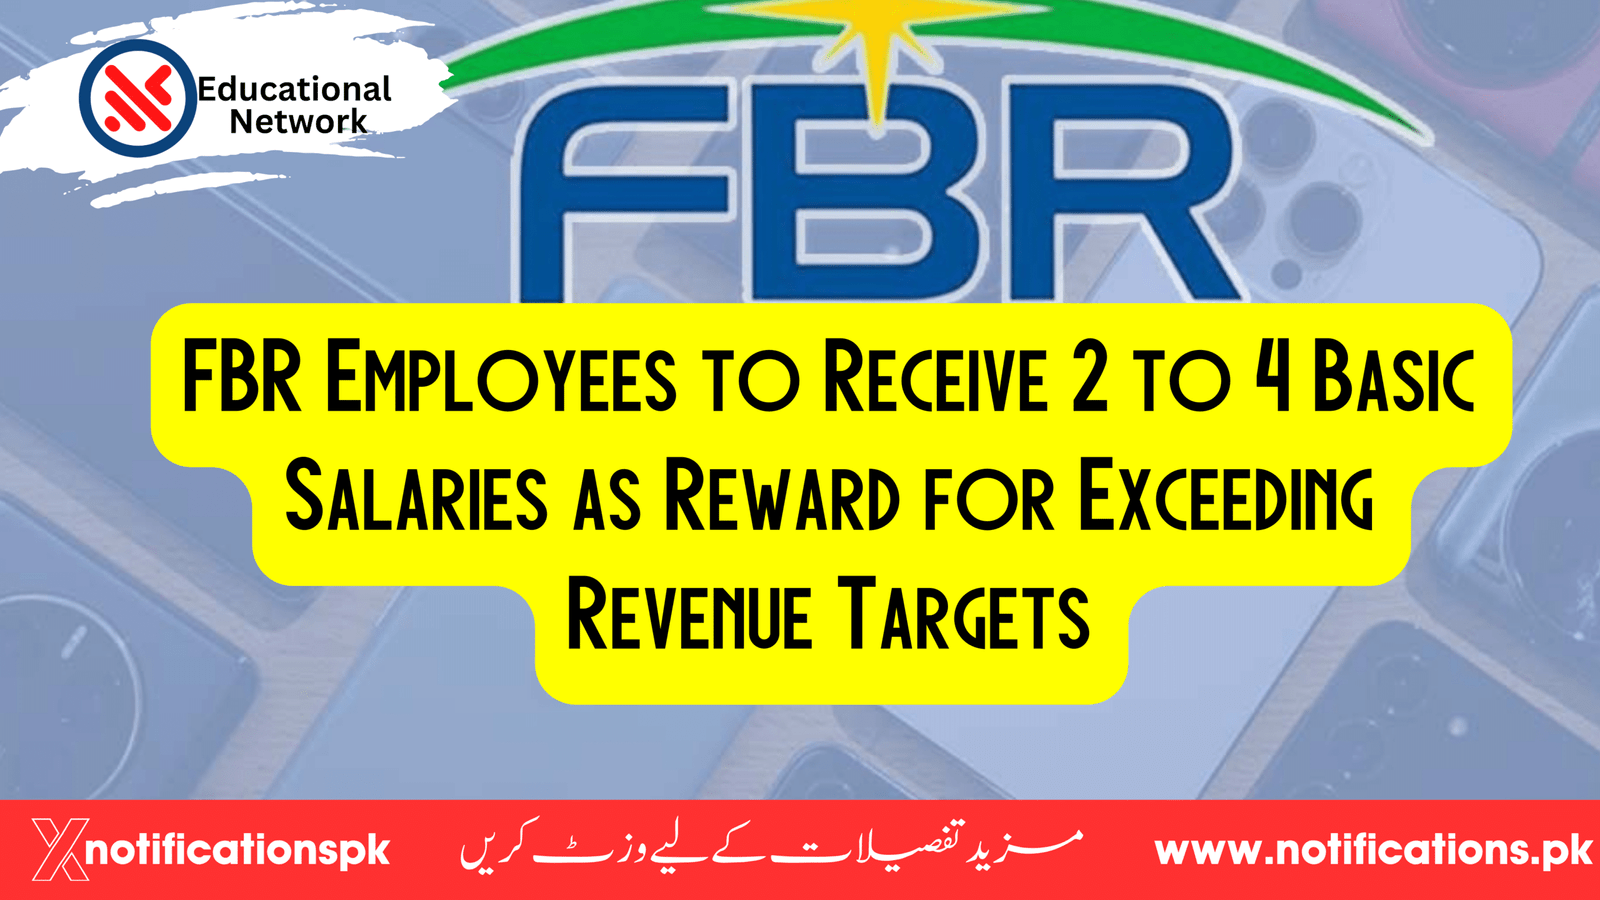 FBR Employees to Receive 2 to 4 Basic Salaries as Reward for Exceeding Revenue Targets